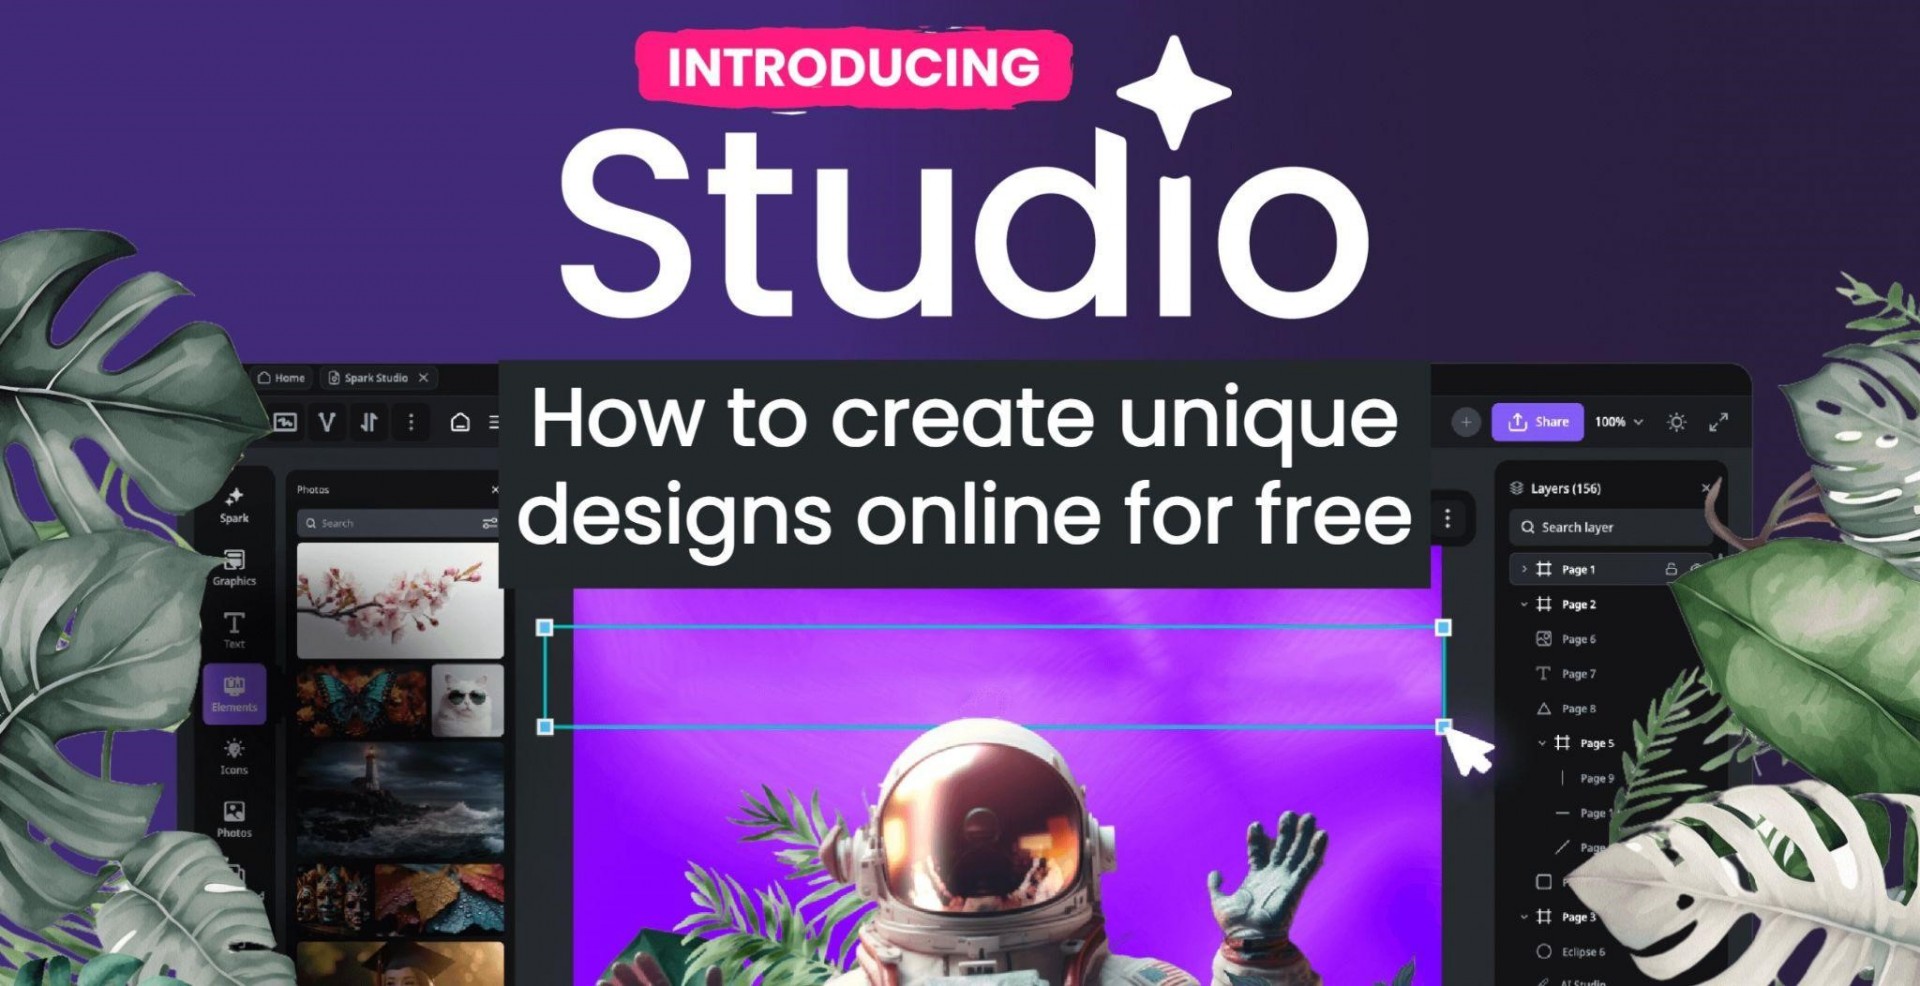 How to Create Unique Designs Online for Free - An Introduction to Studio